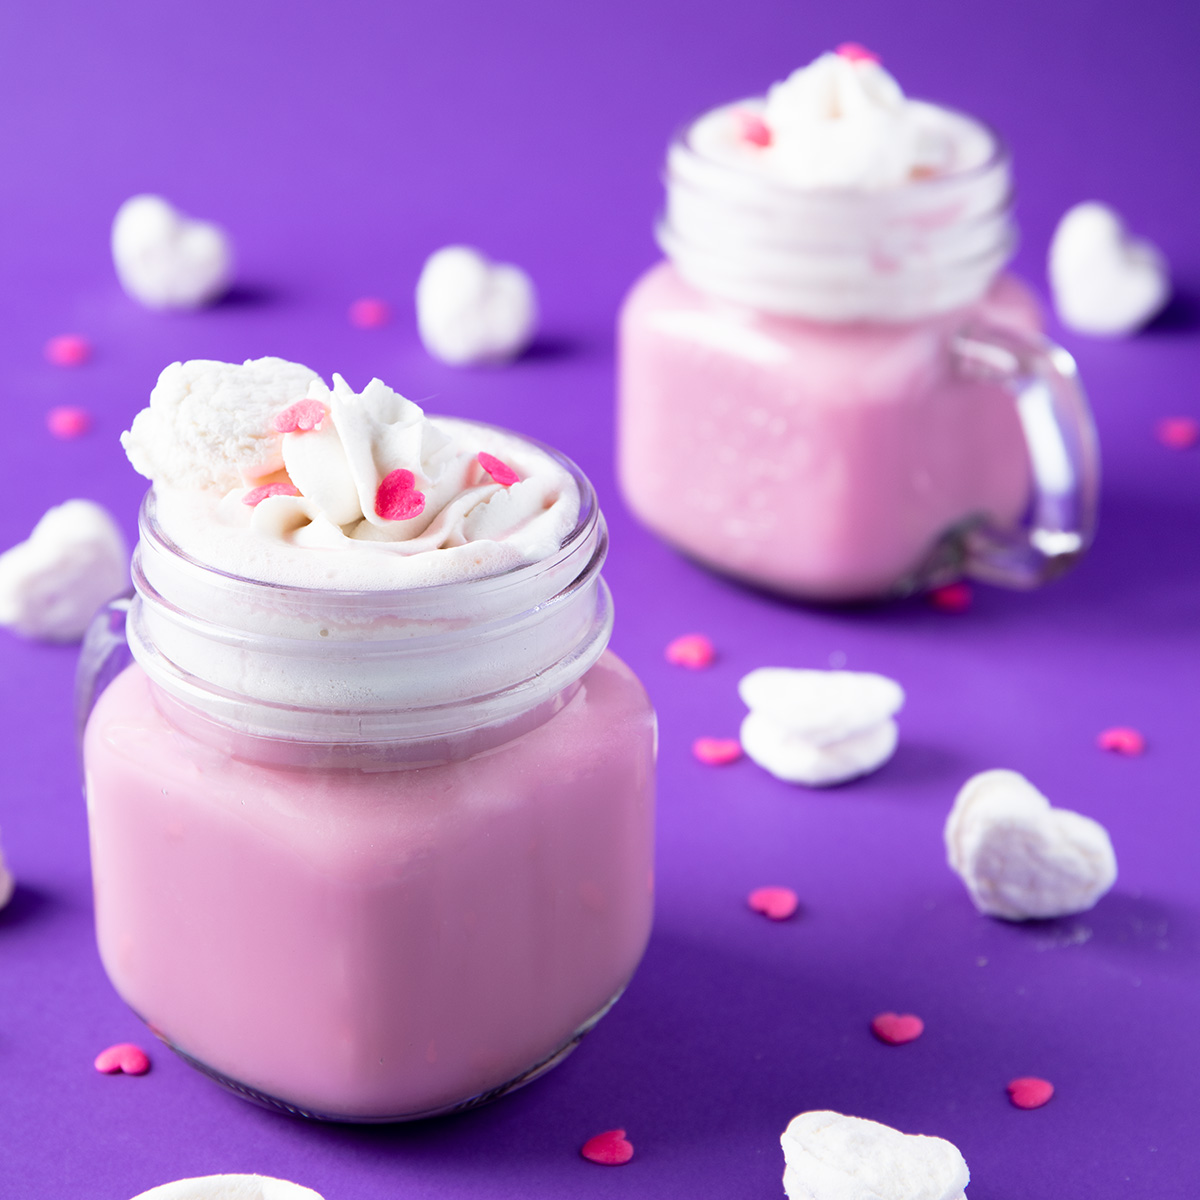 vegan pink peppermint hot cocoa in 2 cups with whipped cream, pink heart sprinkles, and heart shaped marshmallows